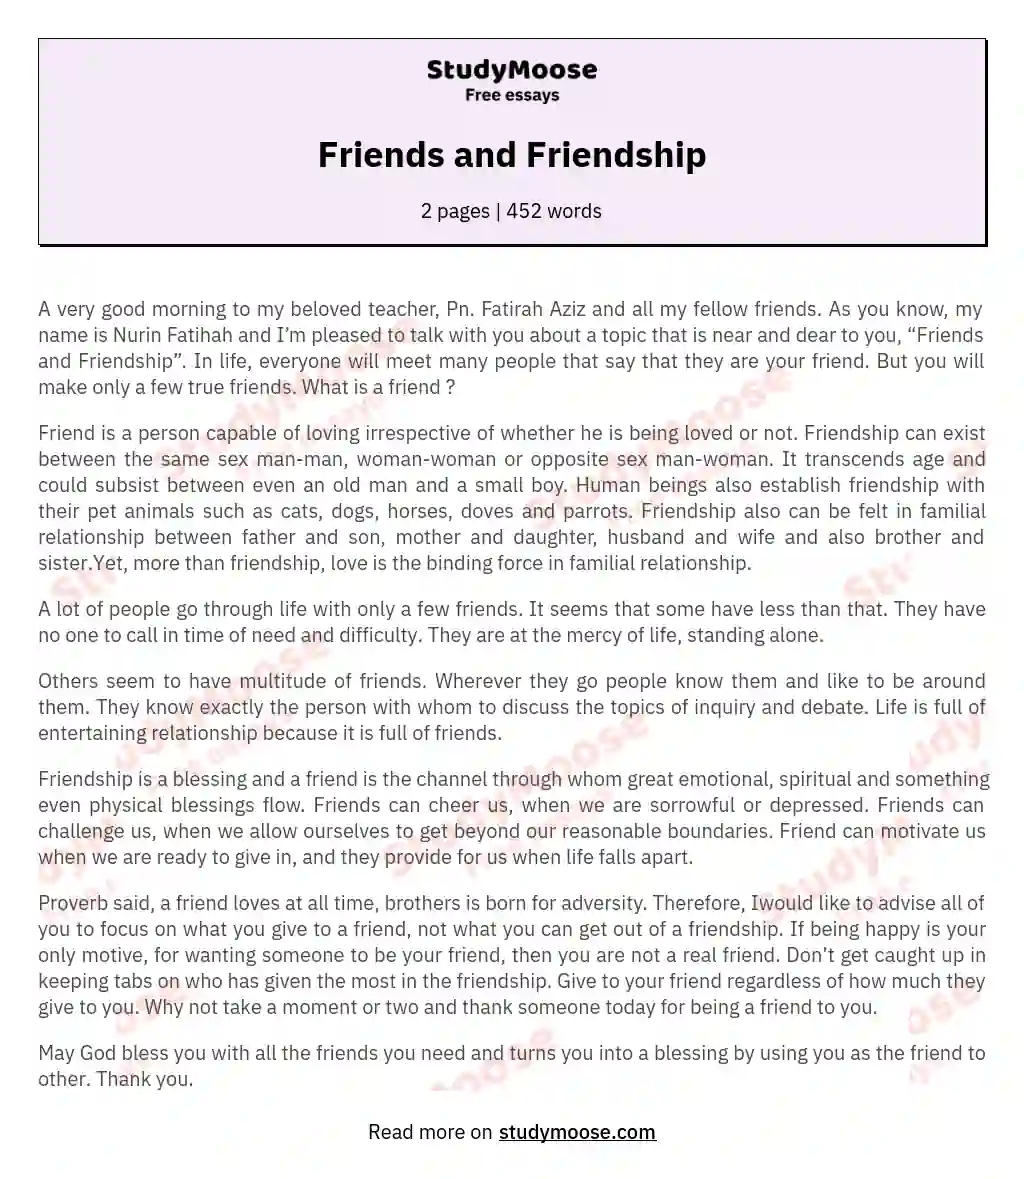 Friends and Friendship essay